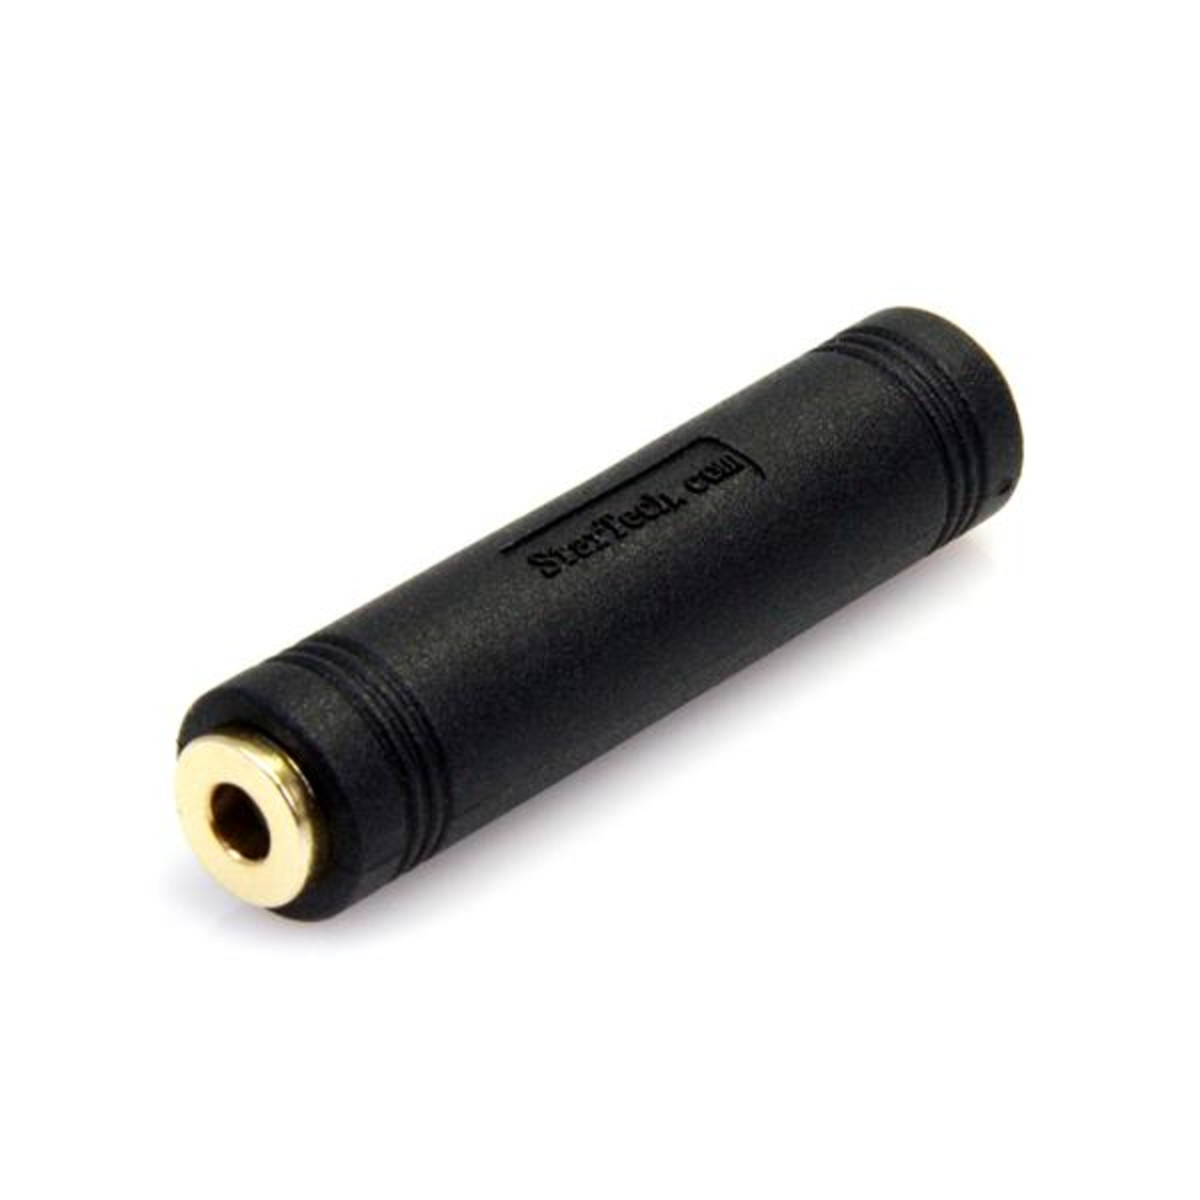 3.5 mm to 3.5 mm Audio Coupler